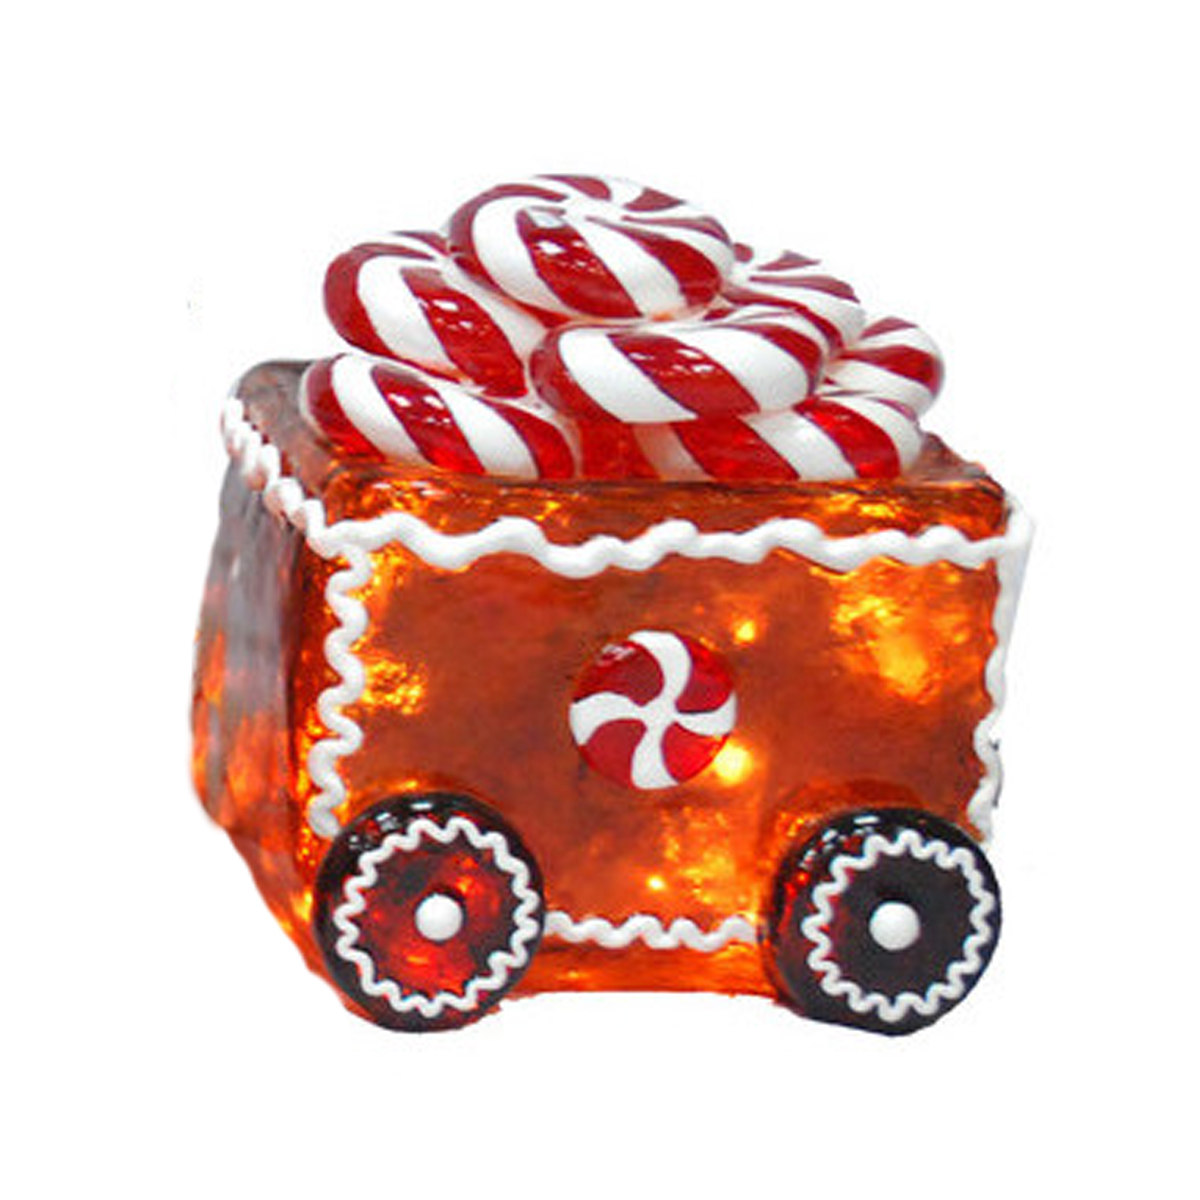 Illuminated Gingerbread Peppermint Candy Freight Car